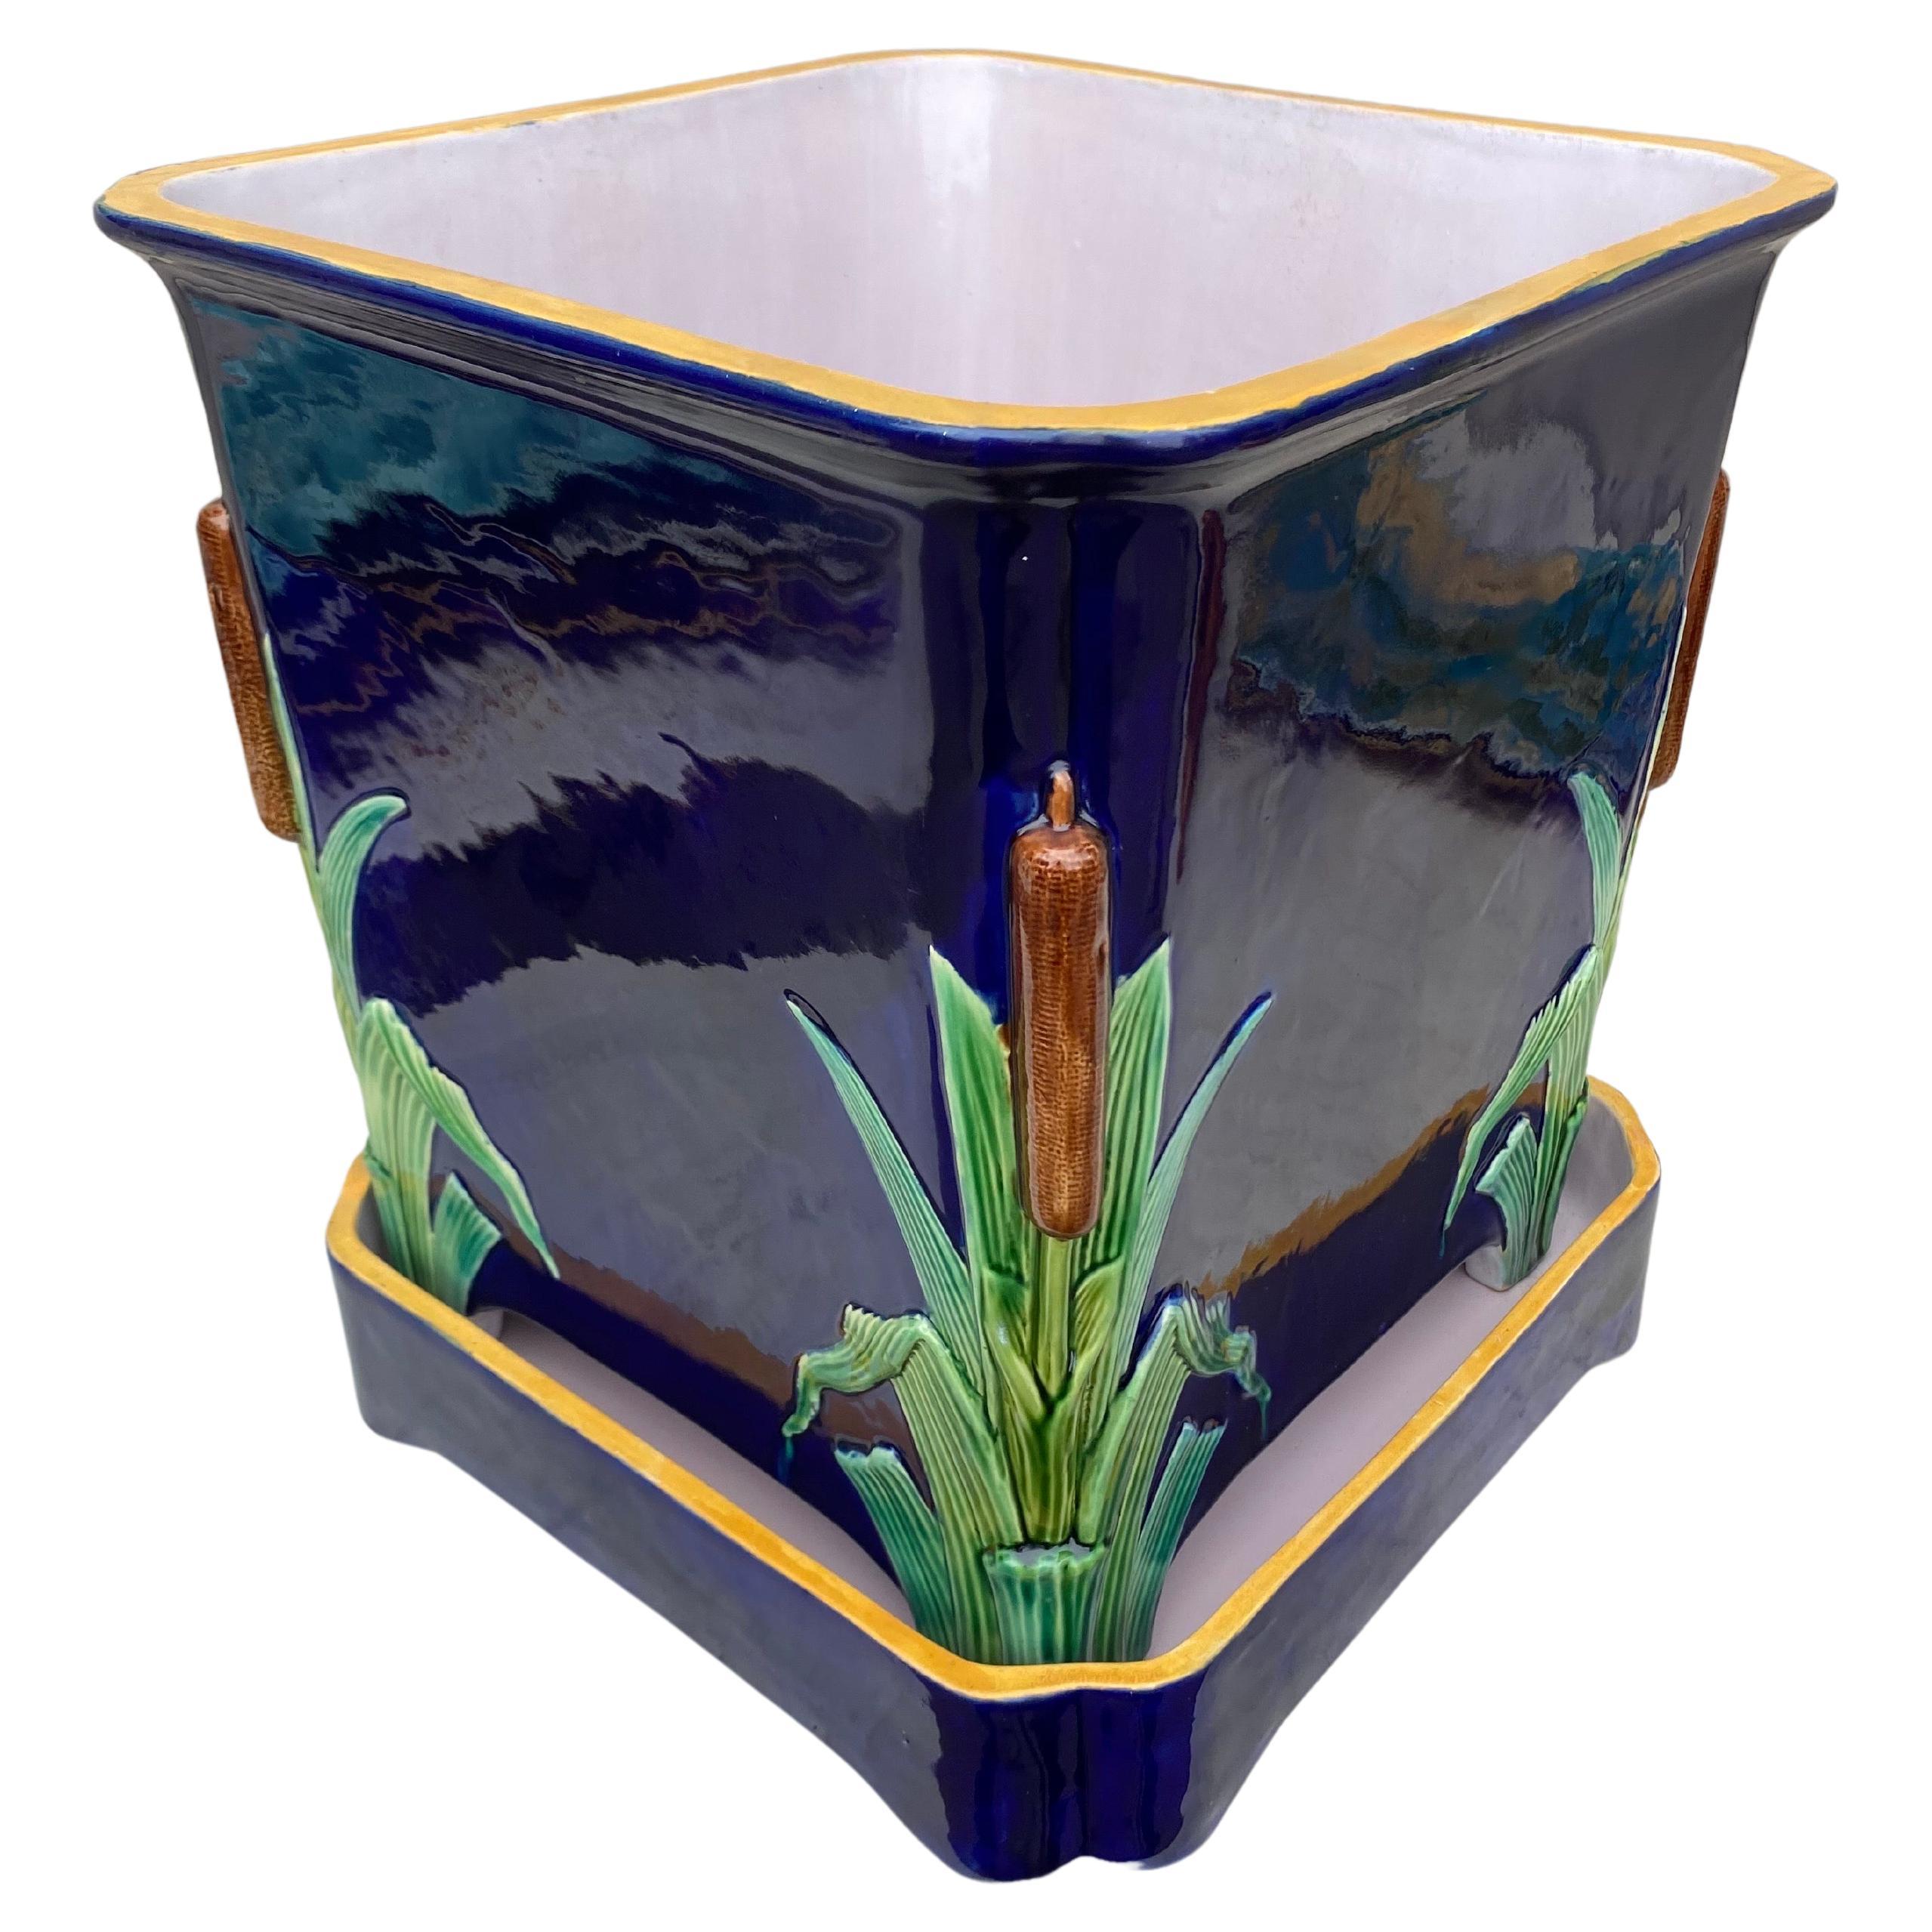 Minton Majolica cobalt blue jardiniere on stand c.1875, the square sectioned jardiniere simply decorated with a cattail on each corner.
Largest size.
Rare size.